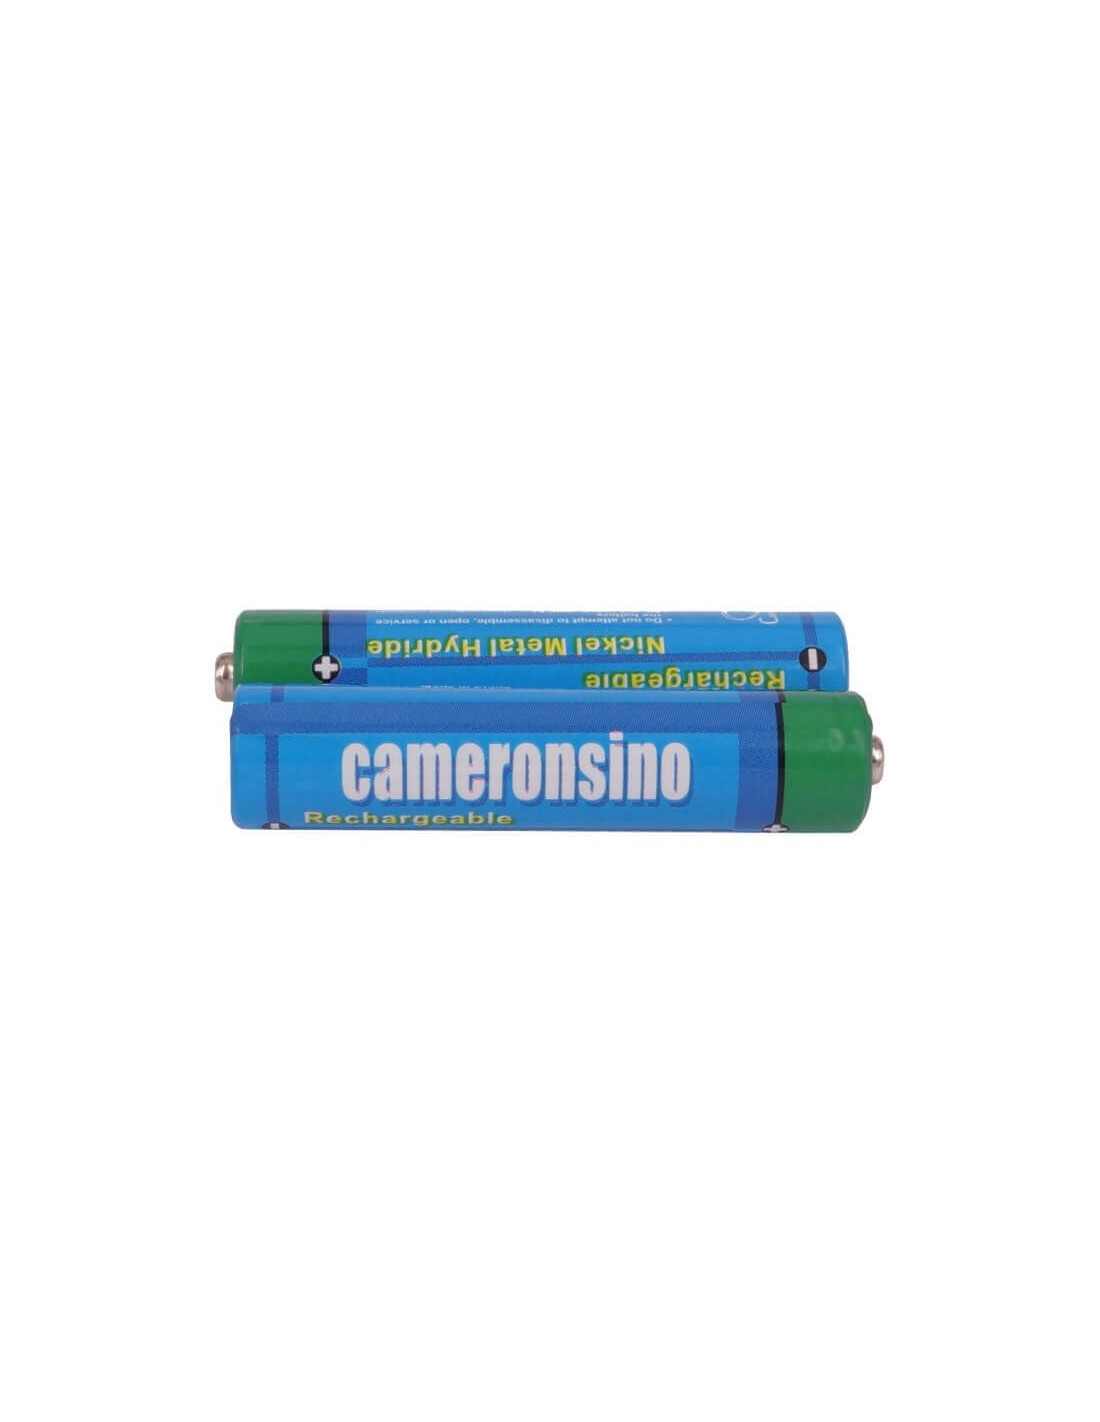 Battery for Cameron Sino, Aaa, Am4, Hr03 1.2V, 800mAh - 0.96Wh